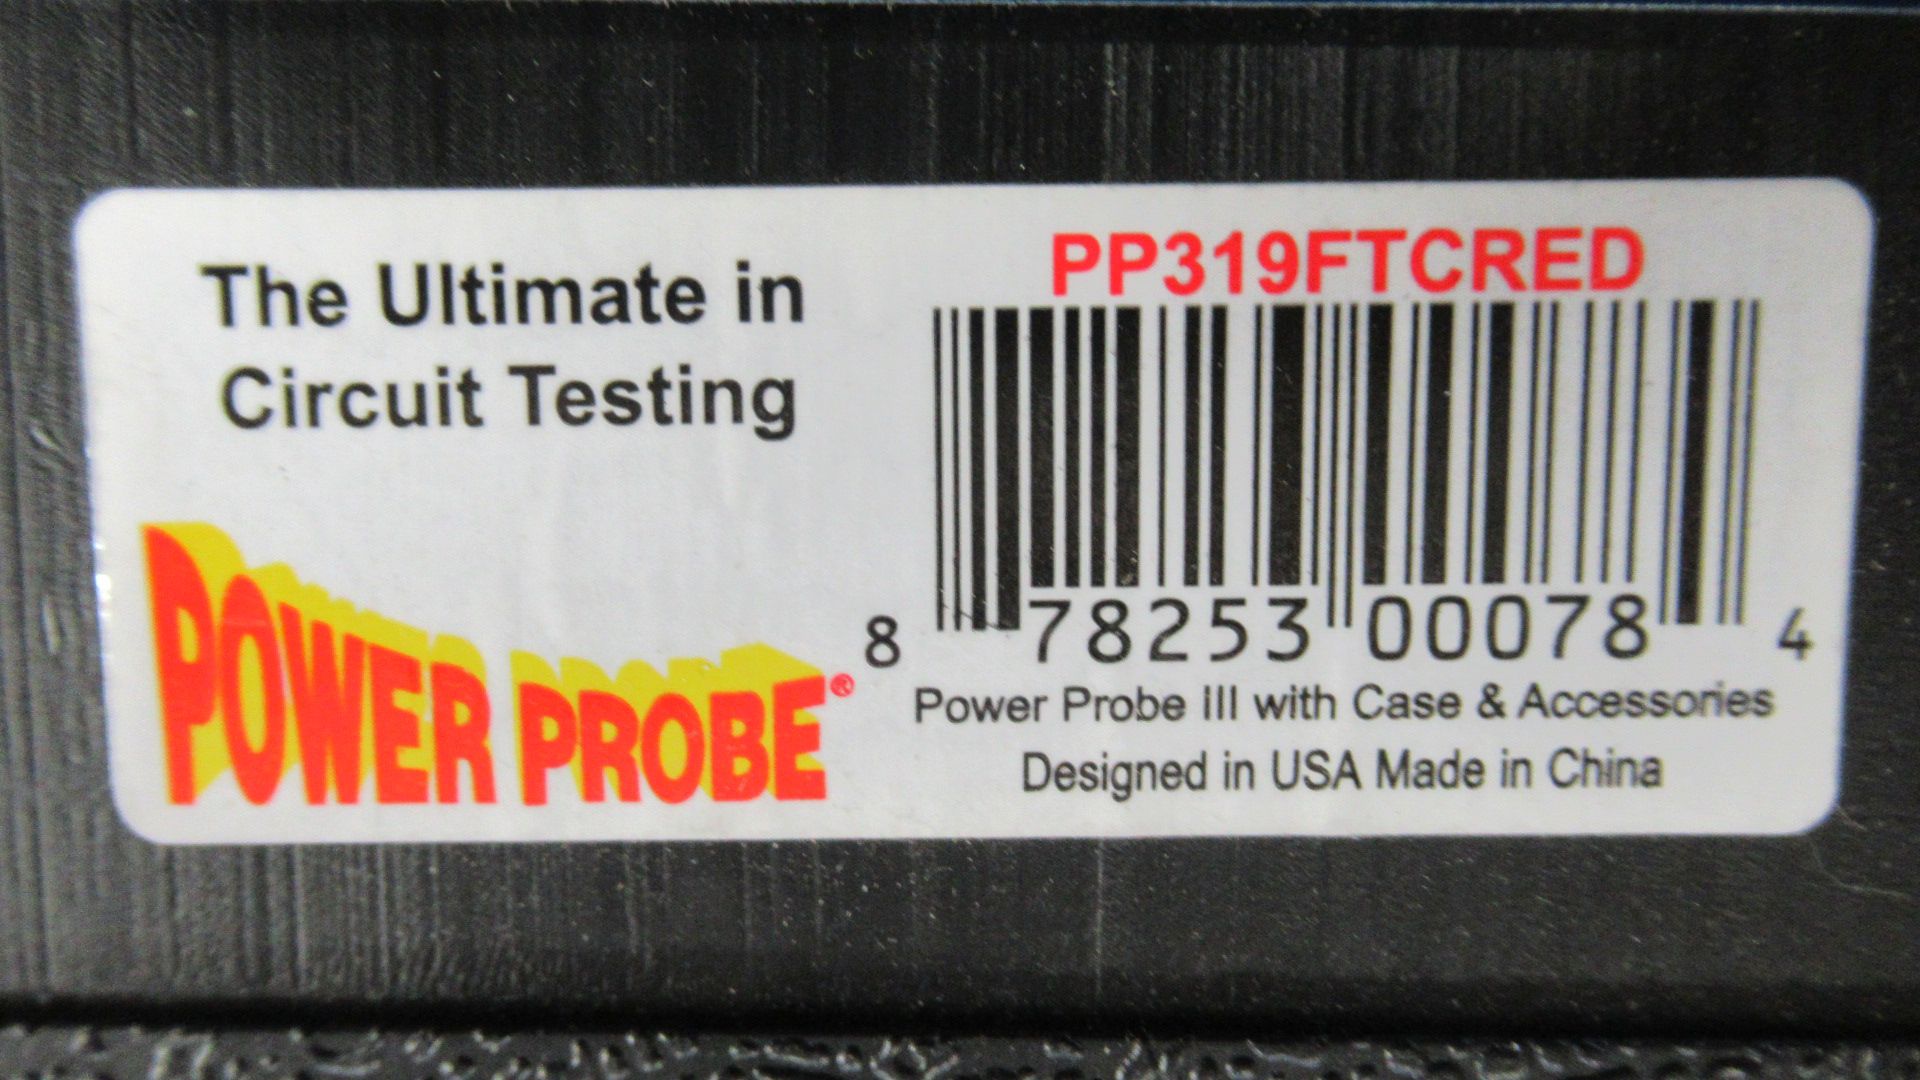 POWER PROBE lll CIRCUIT TESTER PP319FTCRED - Image 2 of 2